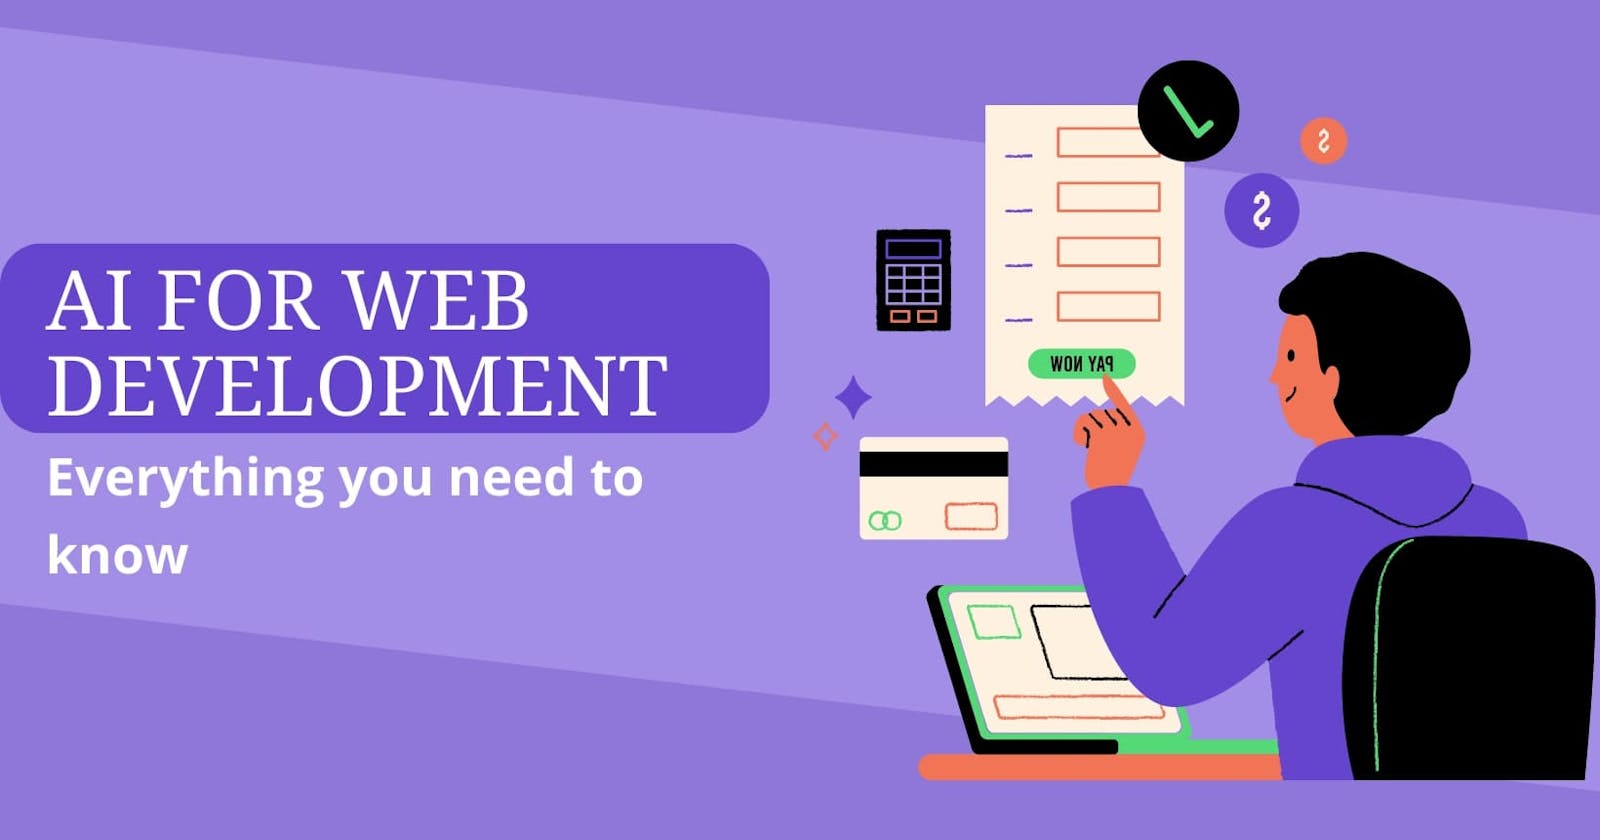 Al for web development: everything you need to know